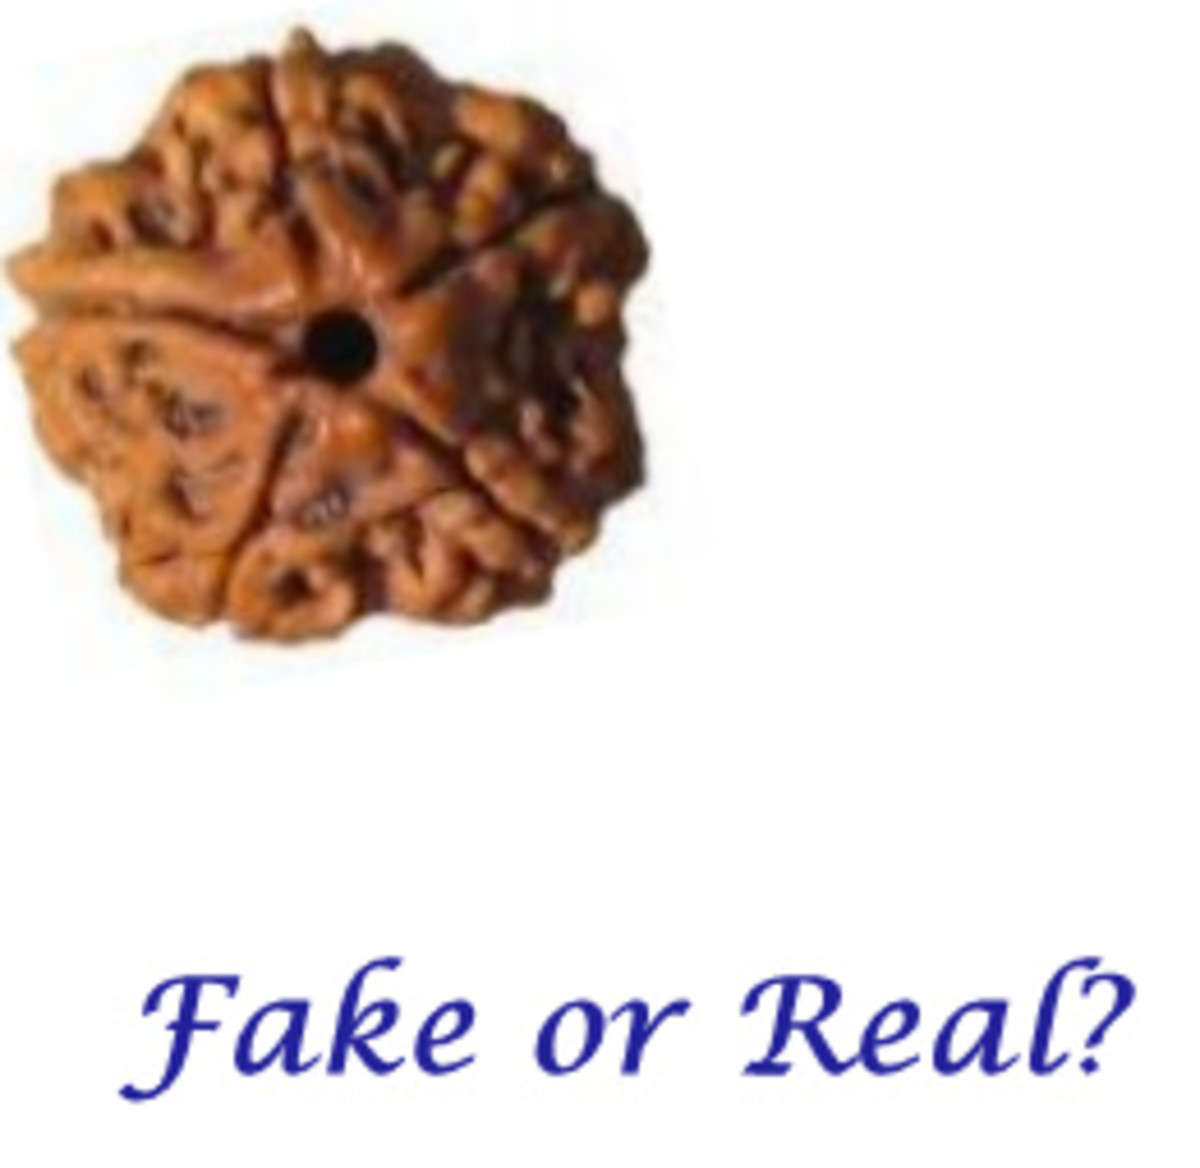 How to know if a Rudraksha Bead is real or fake? Methods for Testing if a Rudraksh is Original